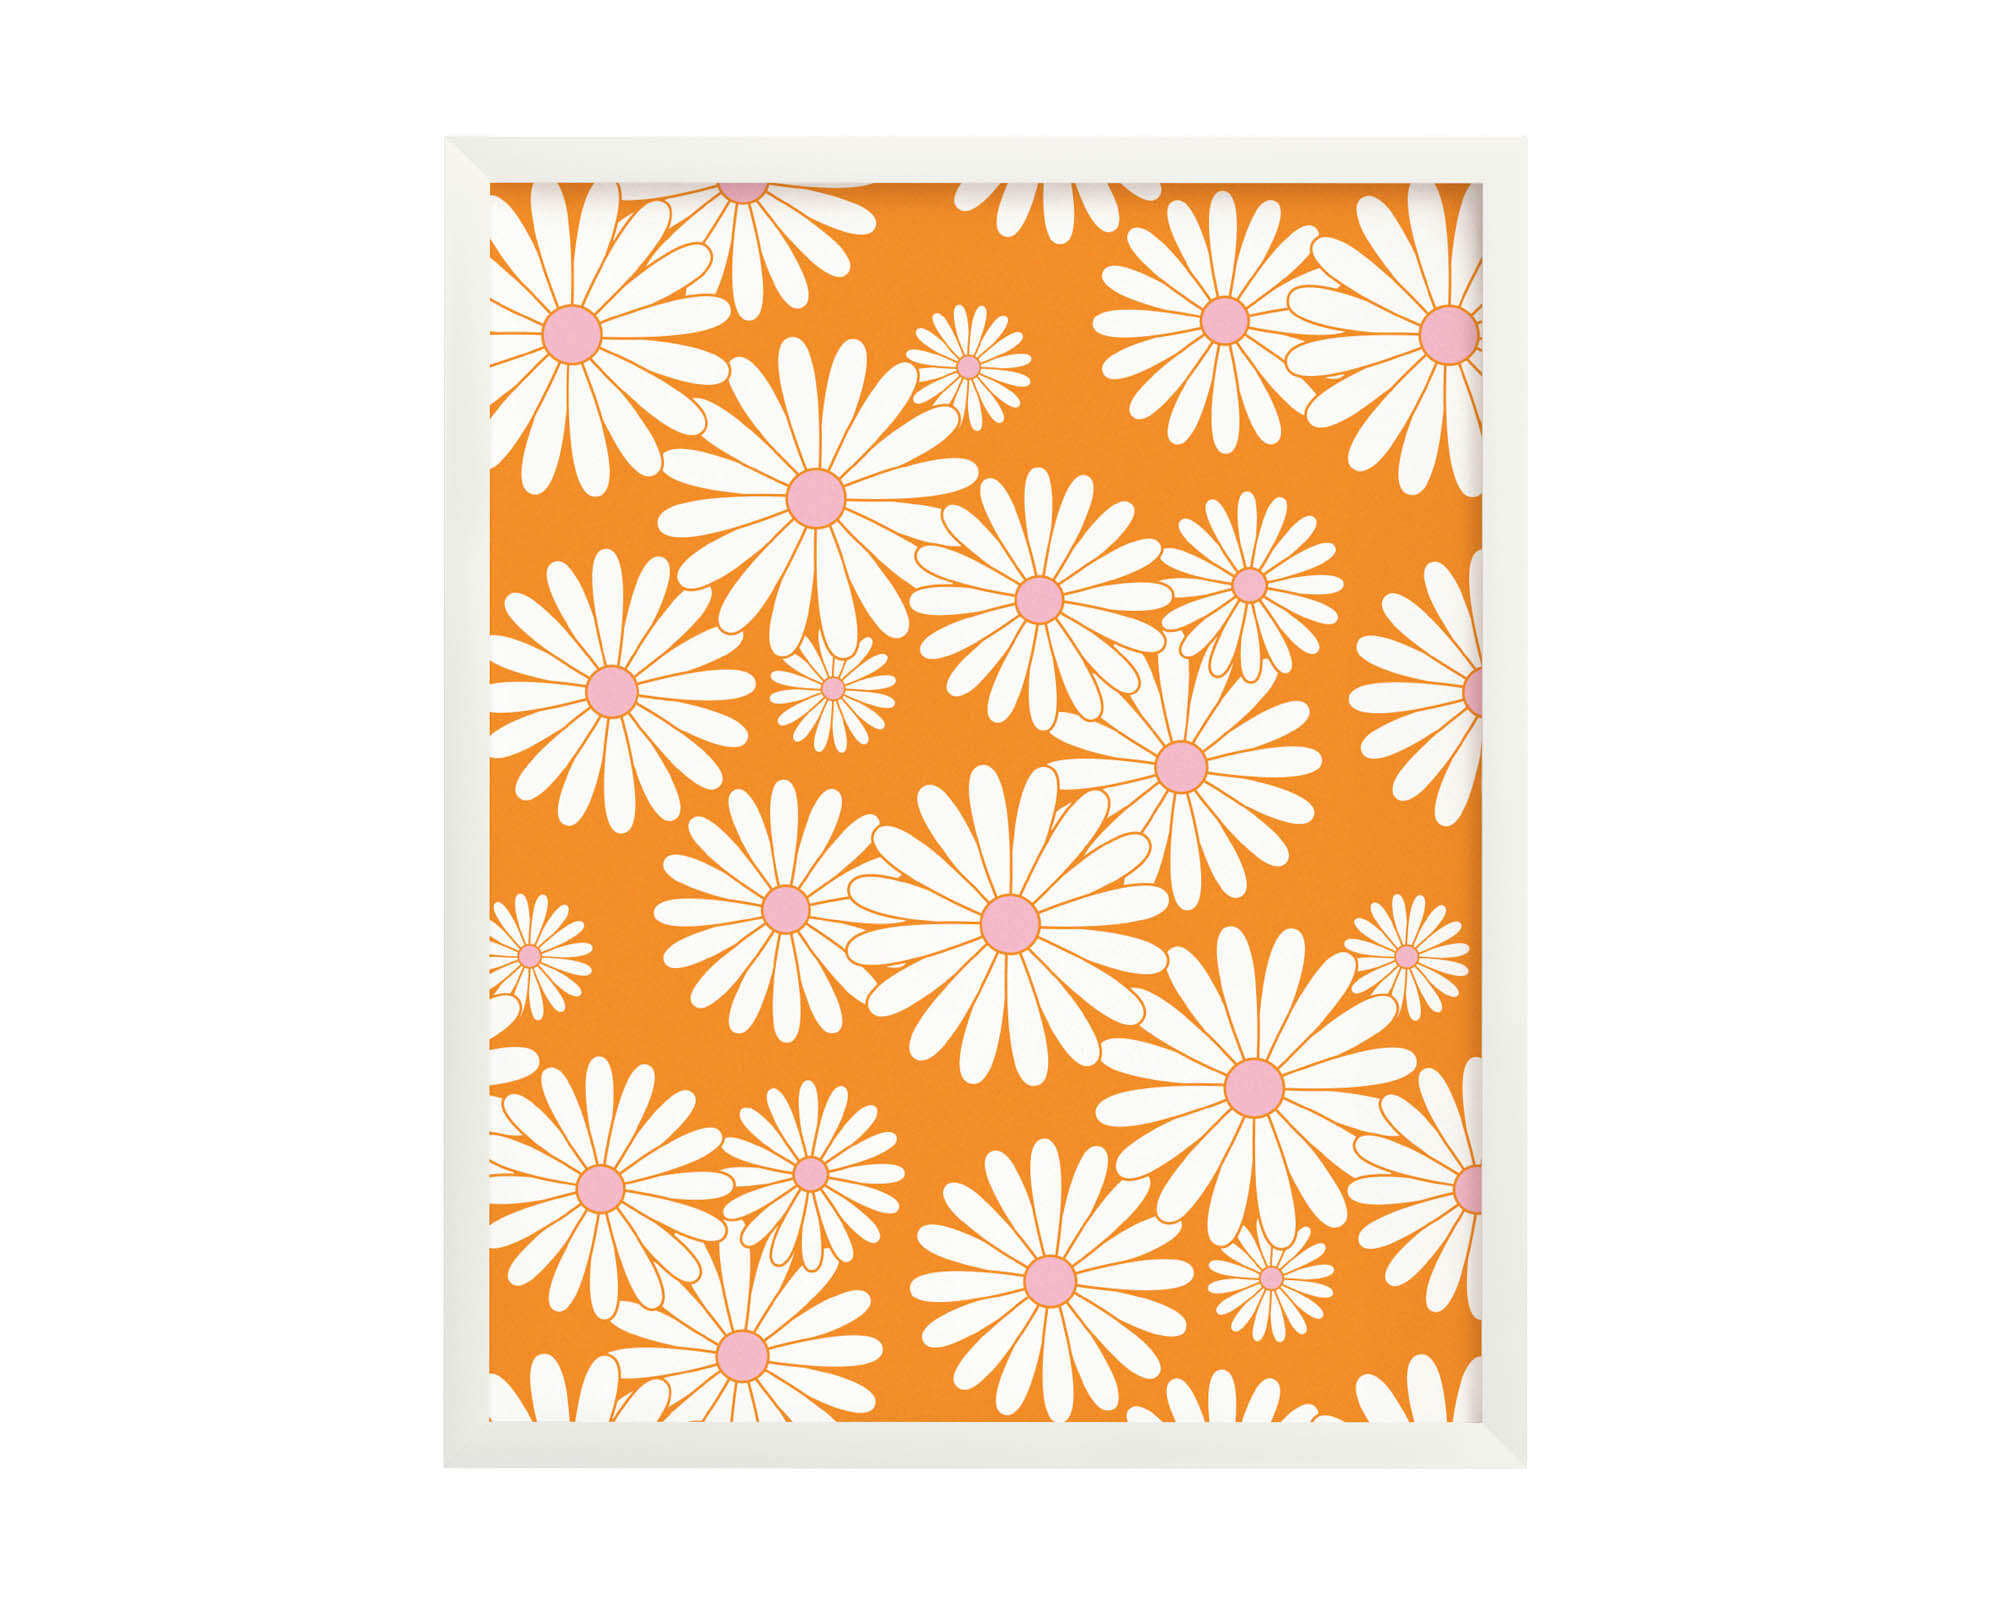 "Ditsy Daisy Love" scattered daisy pattern archival giclée art print in orange and pink. Made in USA by My Darlin' @mydarlin_bk